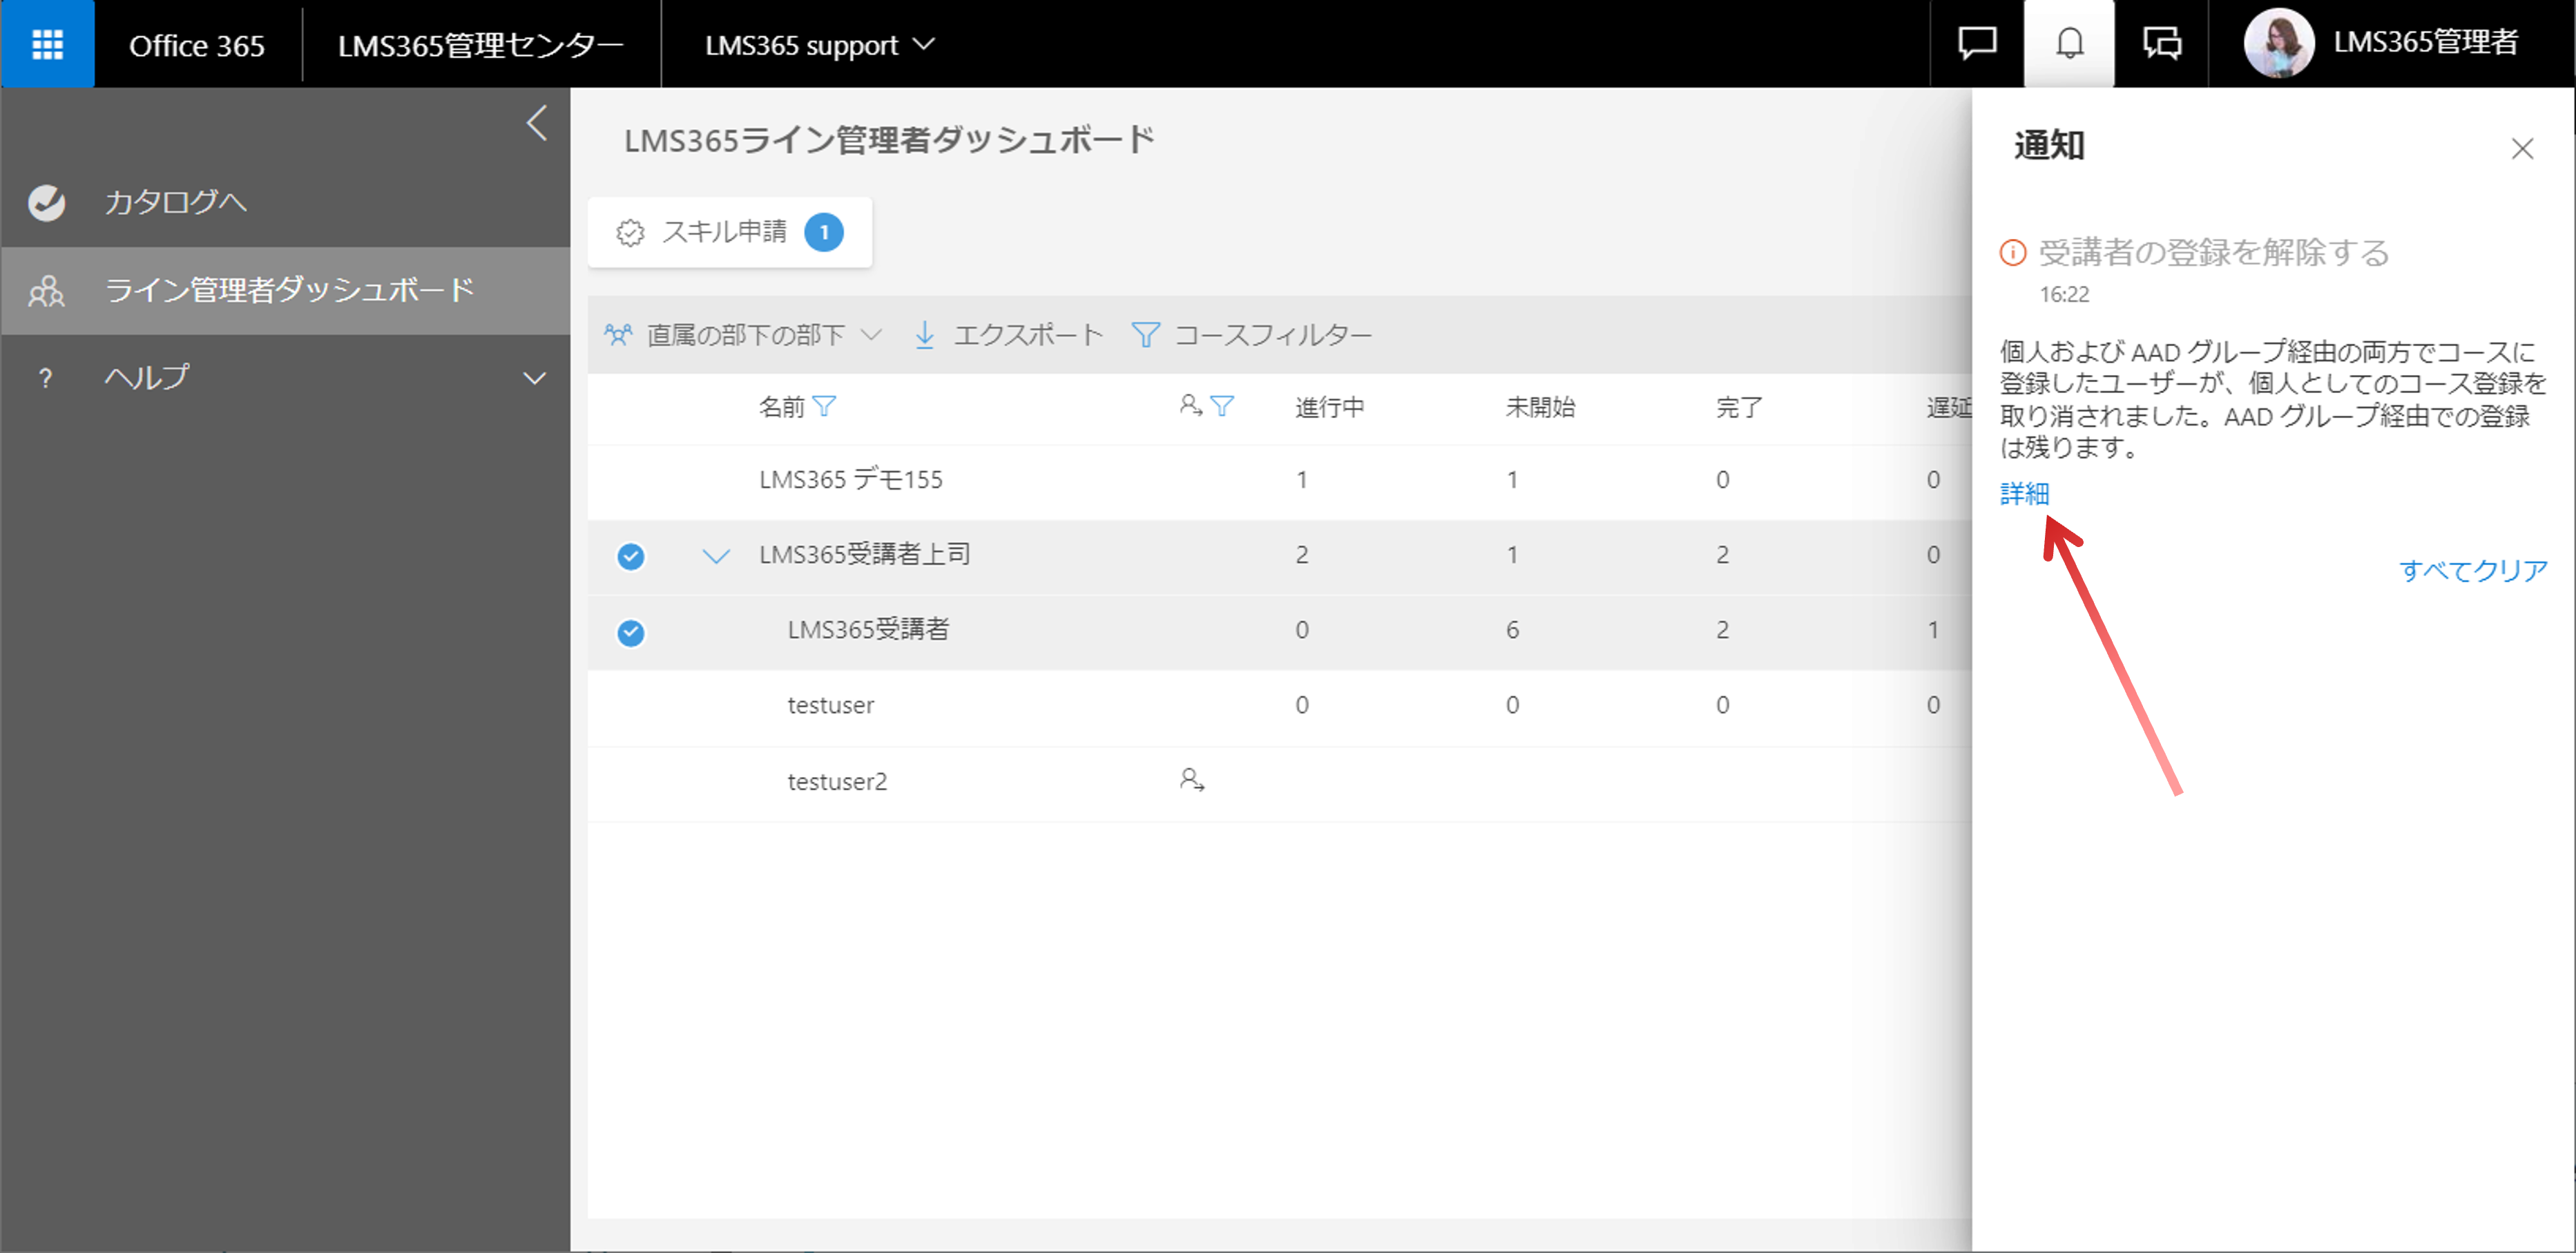 Line Manager Dashboard_User administration11.png